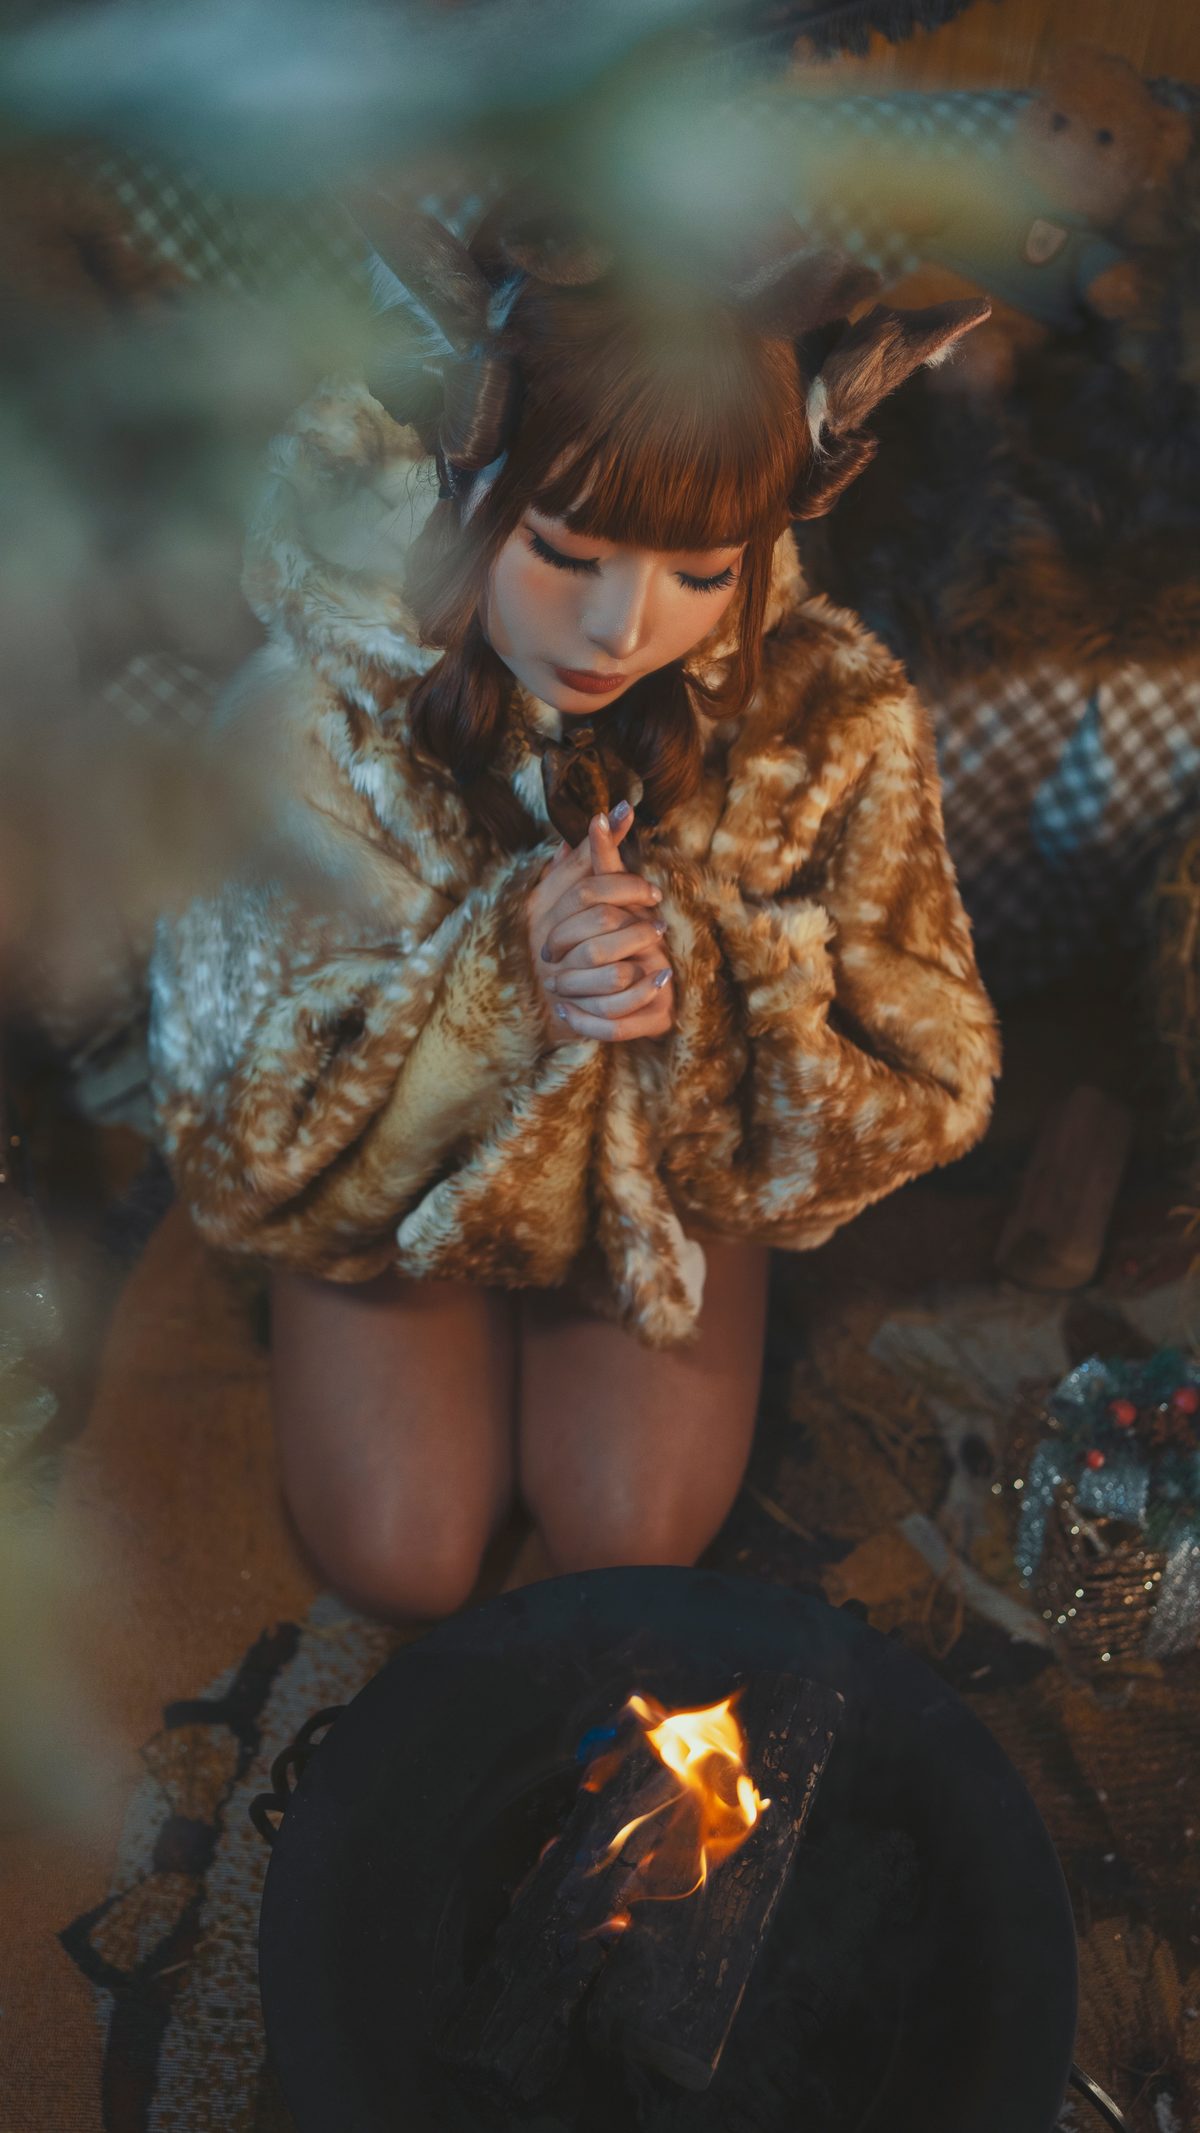 Coser@Kokuhui Vol 017 Escape from Christmas Eve 0075 6897659517.jpg